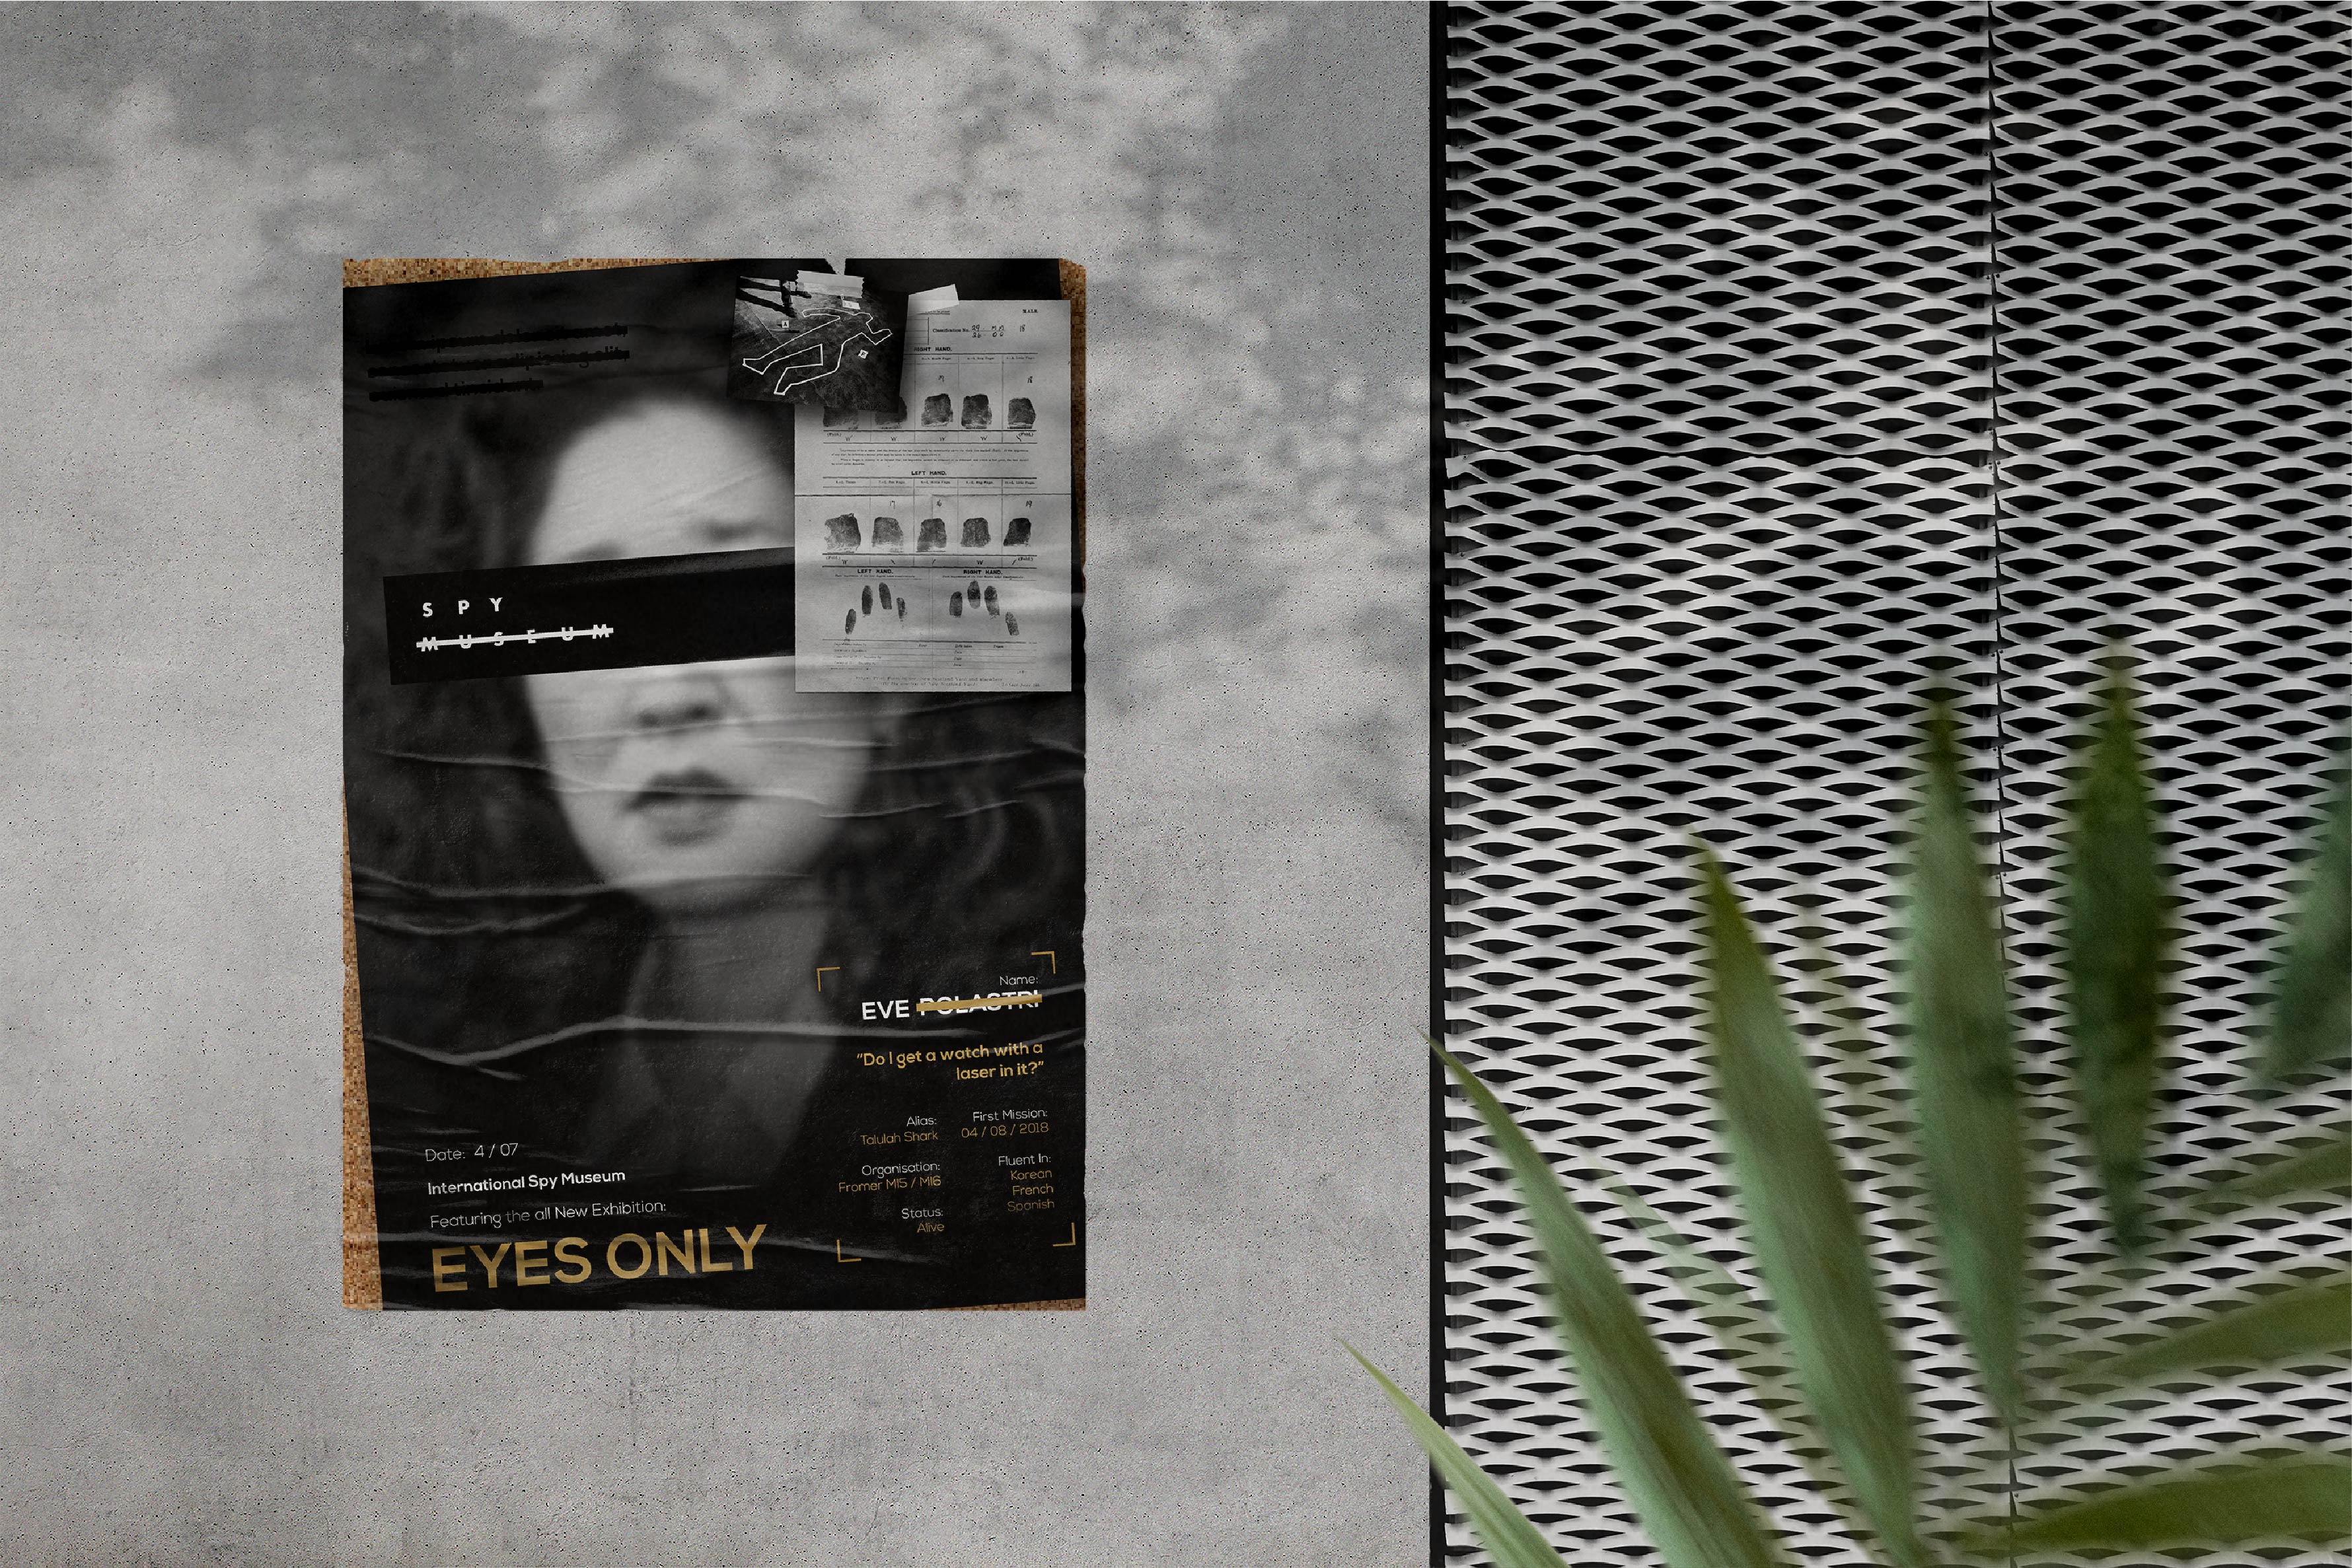 BA Graphic Communications work by Keiran O'Shea showing a poster that depicts a famous spy, with their identity being redacted.